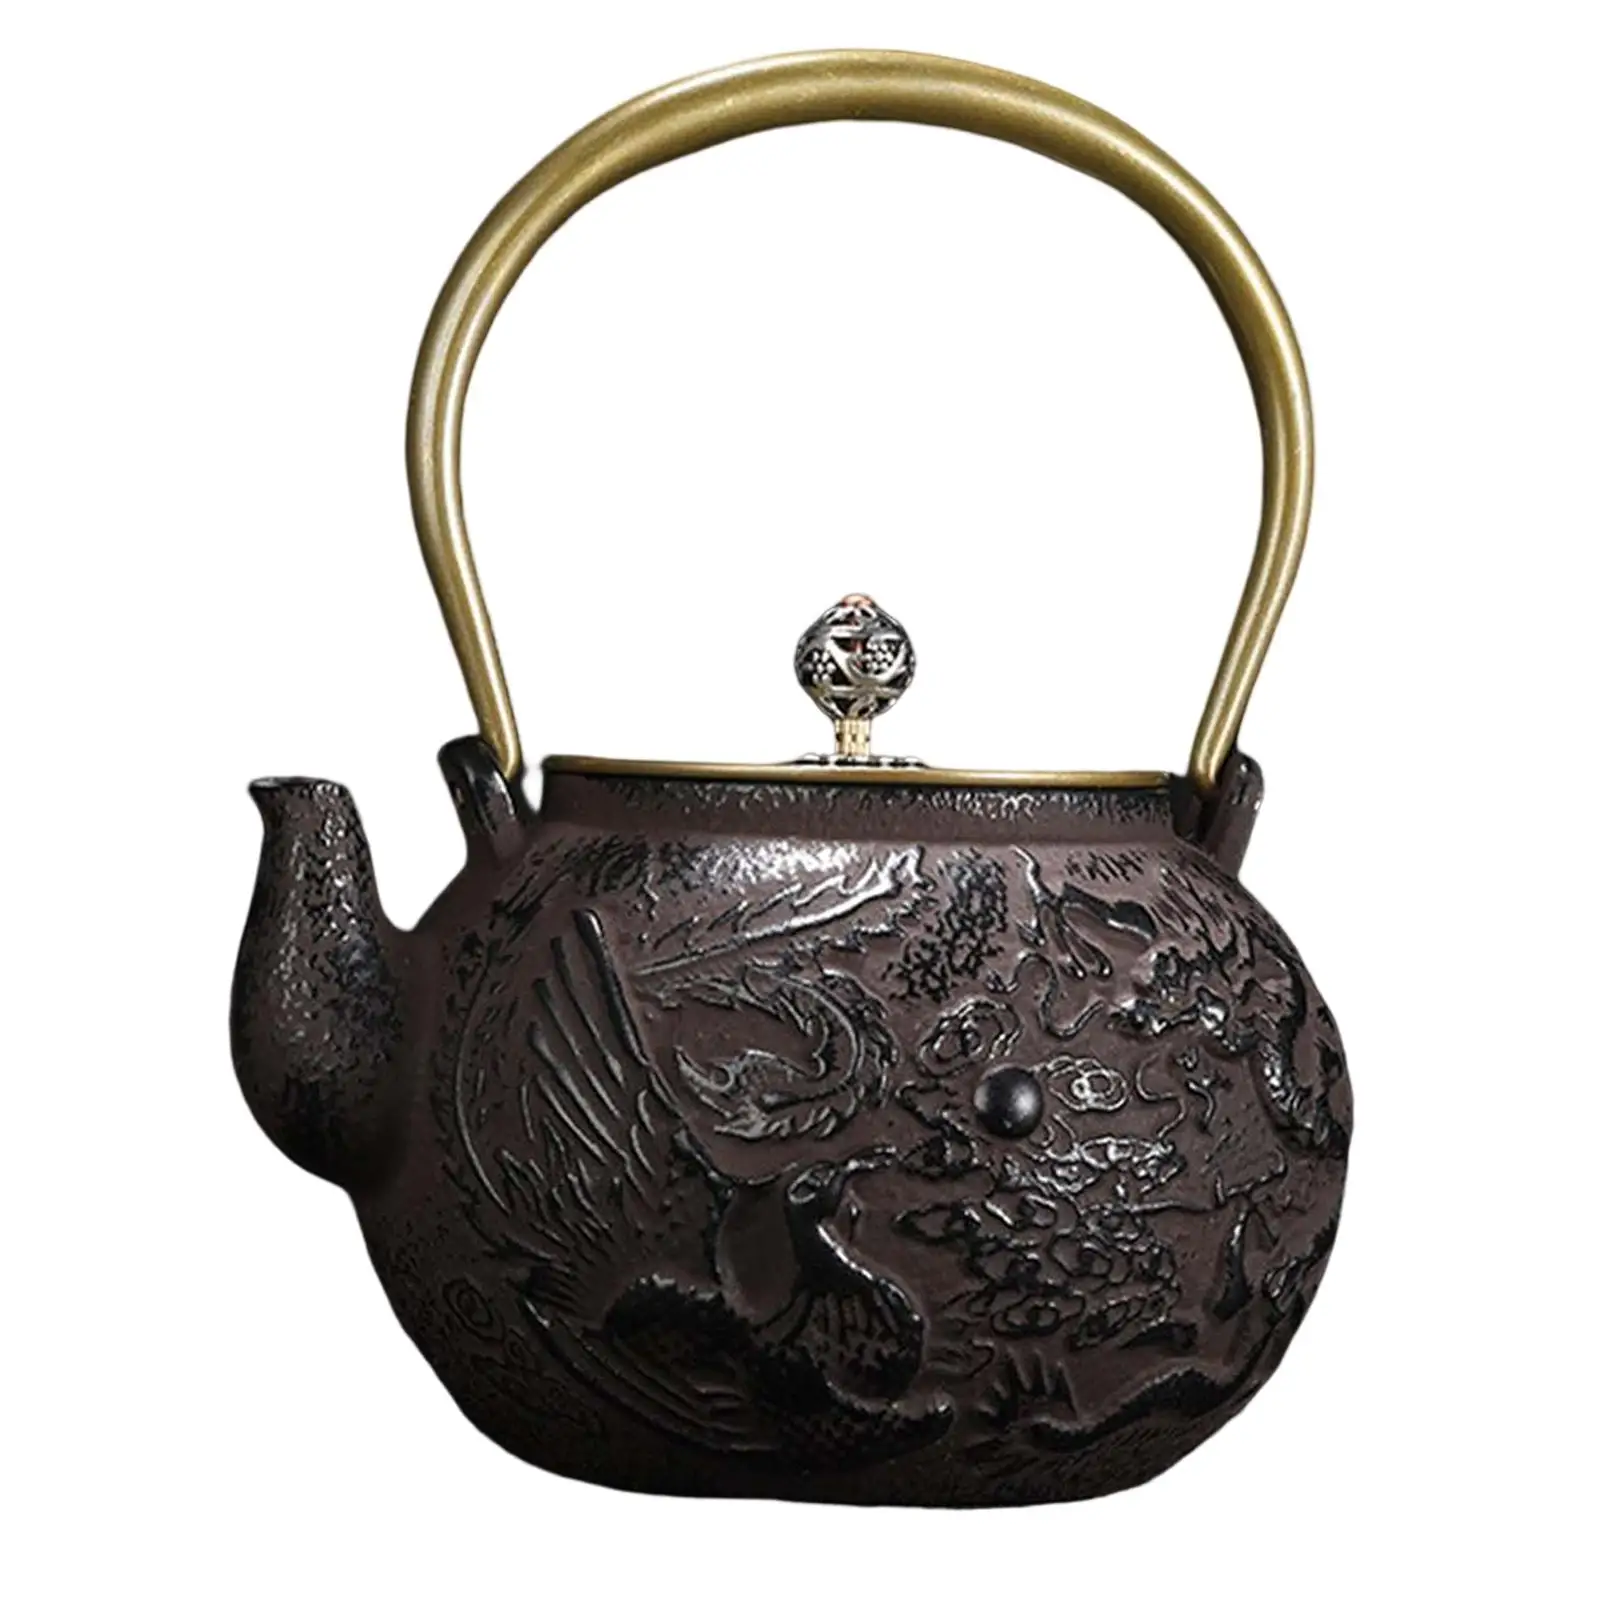 Dragon and Phoenix Pattern Chinese Cast Iron Teapot 1300ml Tea Kettle Table Centerpiece for Father, Mother, Friends, Family